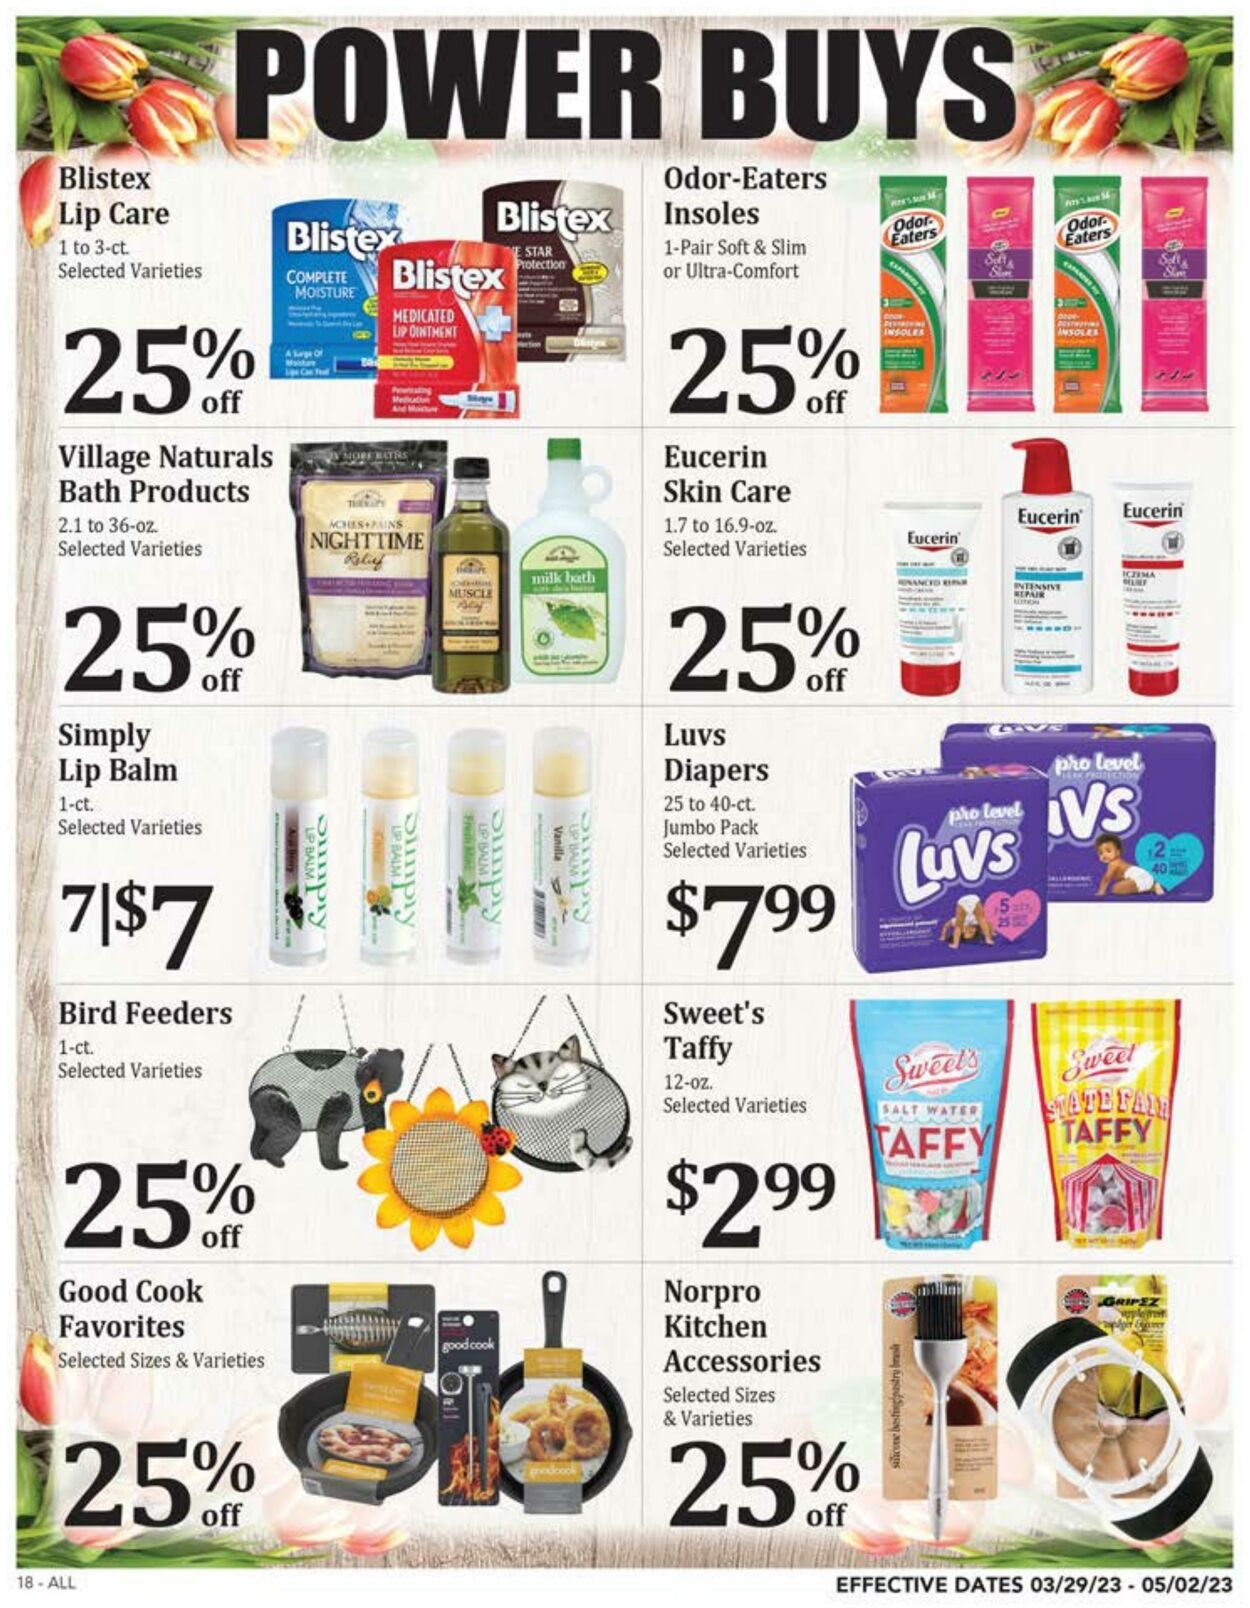 Weekly ad Rosauers 03/01/2023 - 03/31/2023